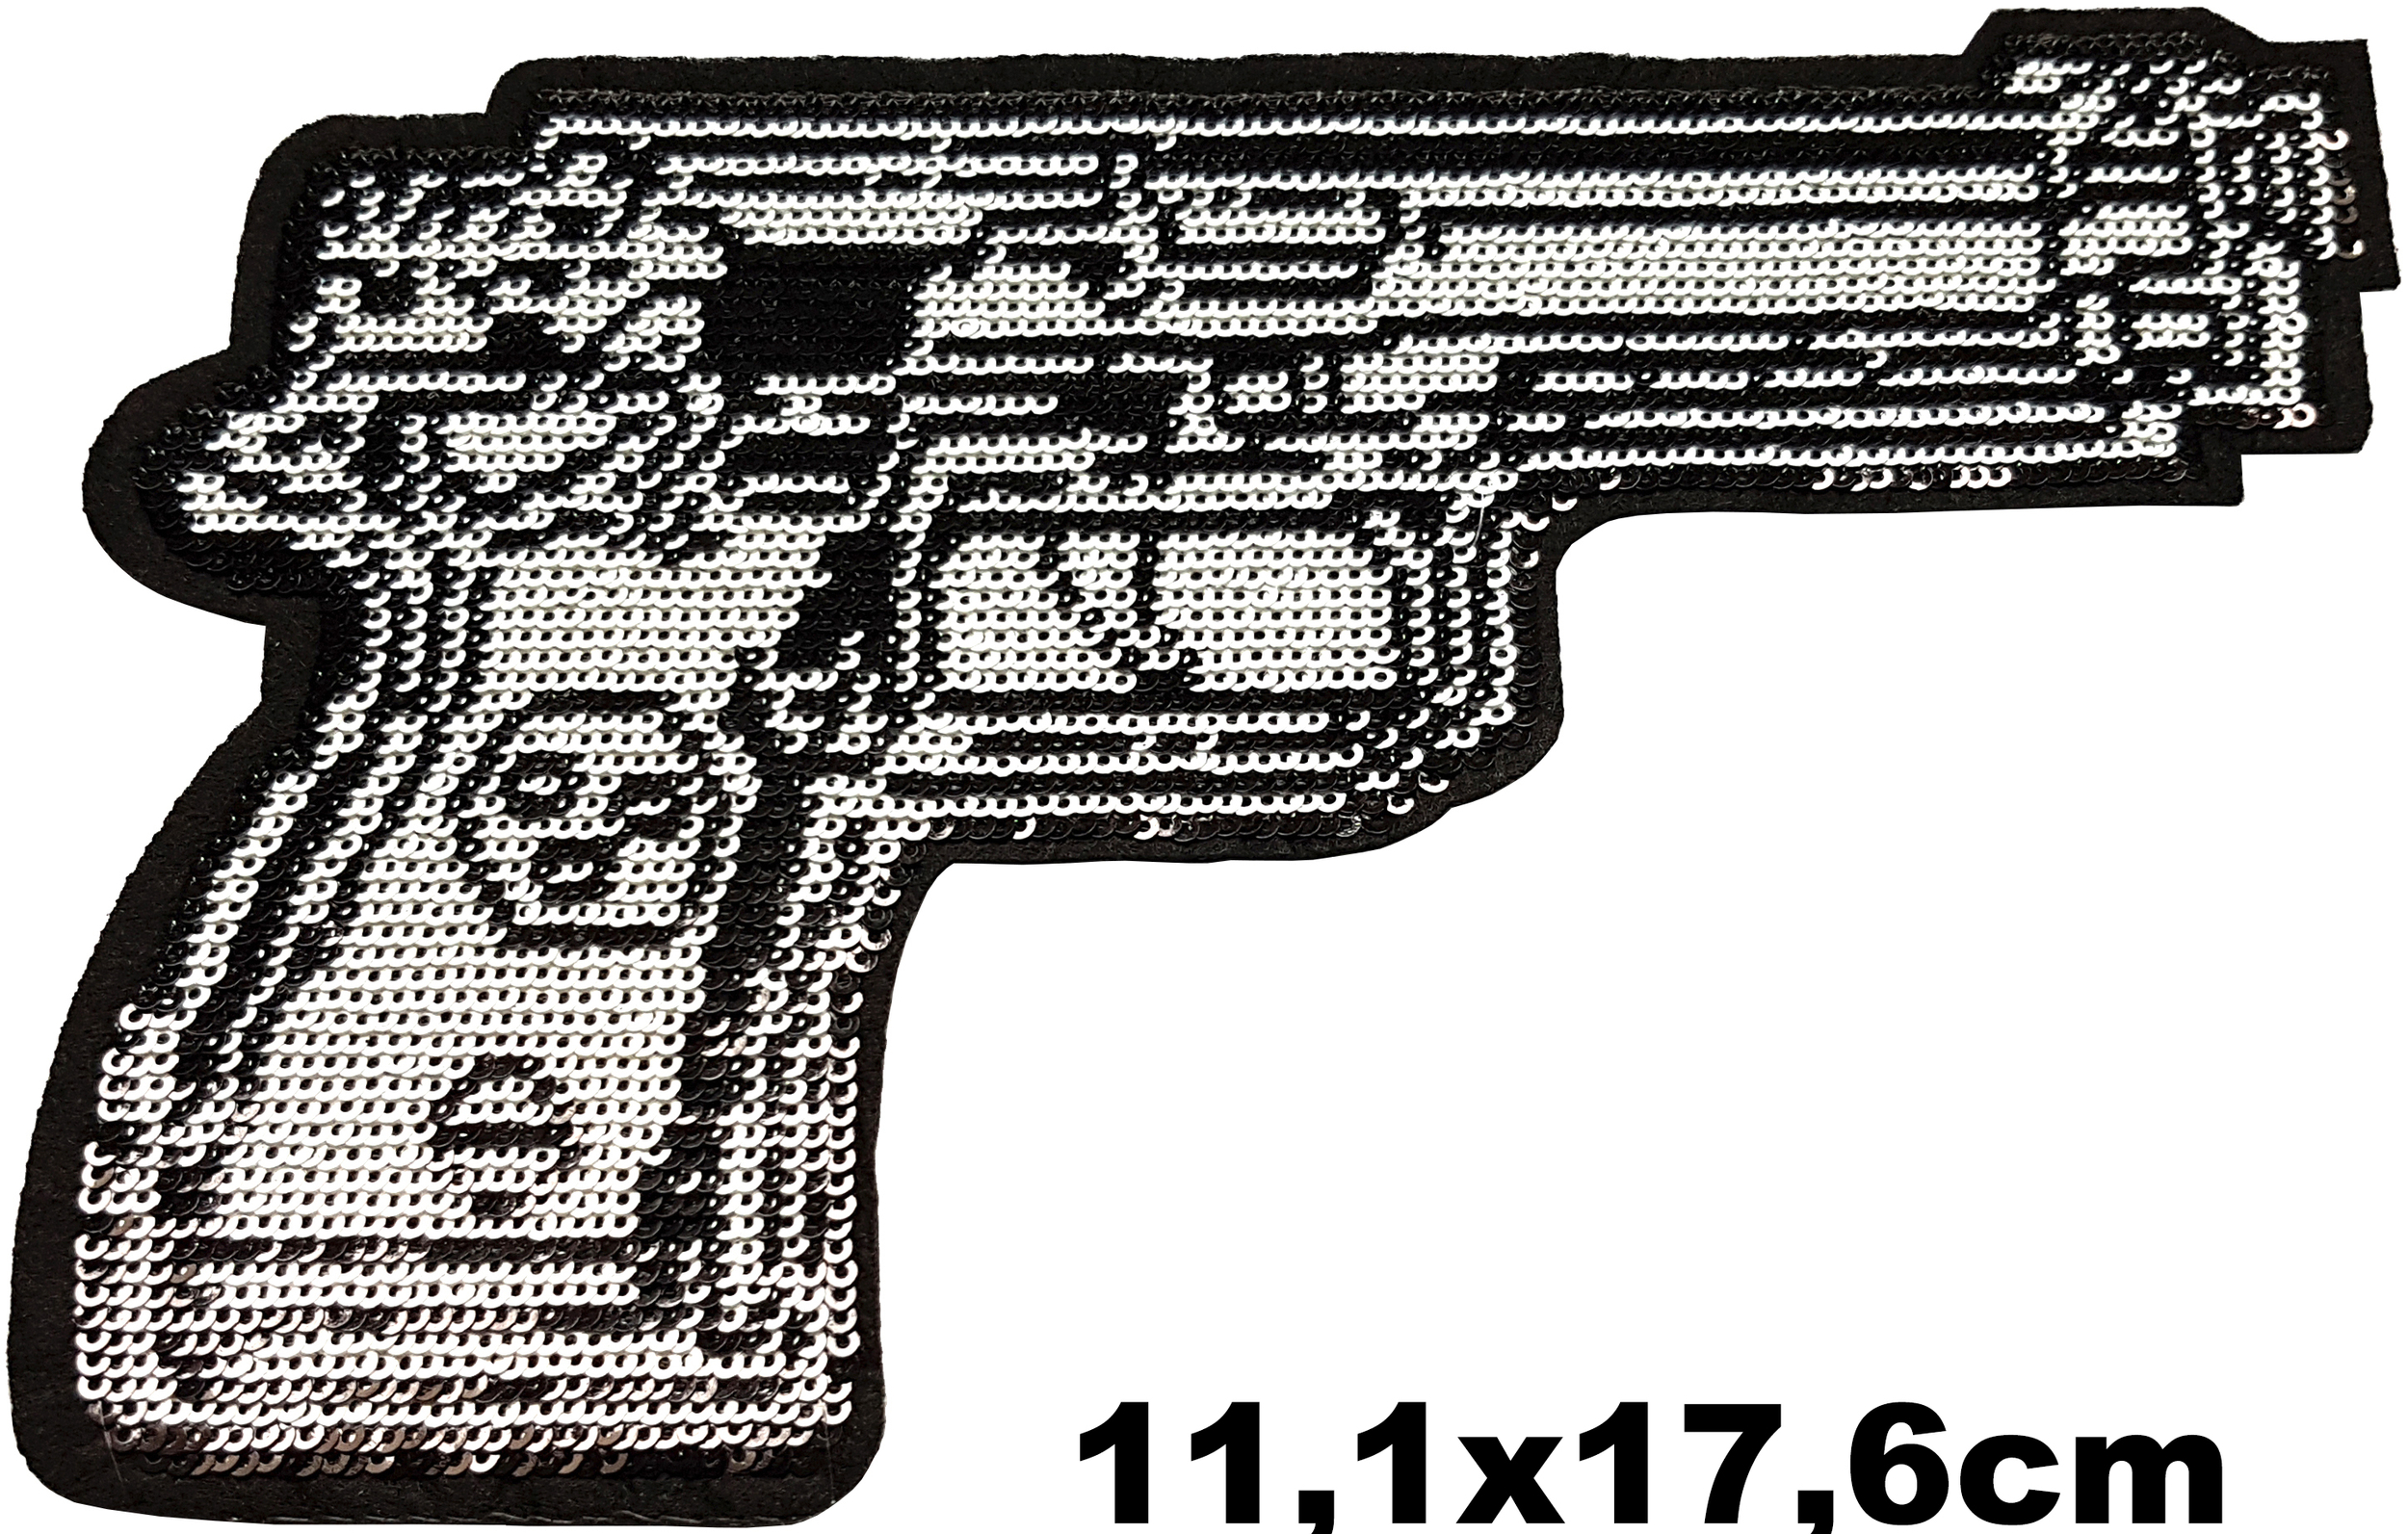 Grand Patch Thermocollant Pistolet Pixel